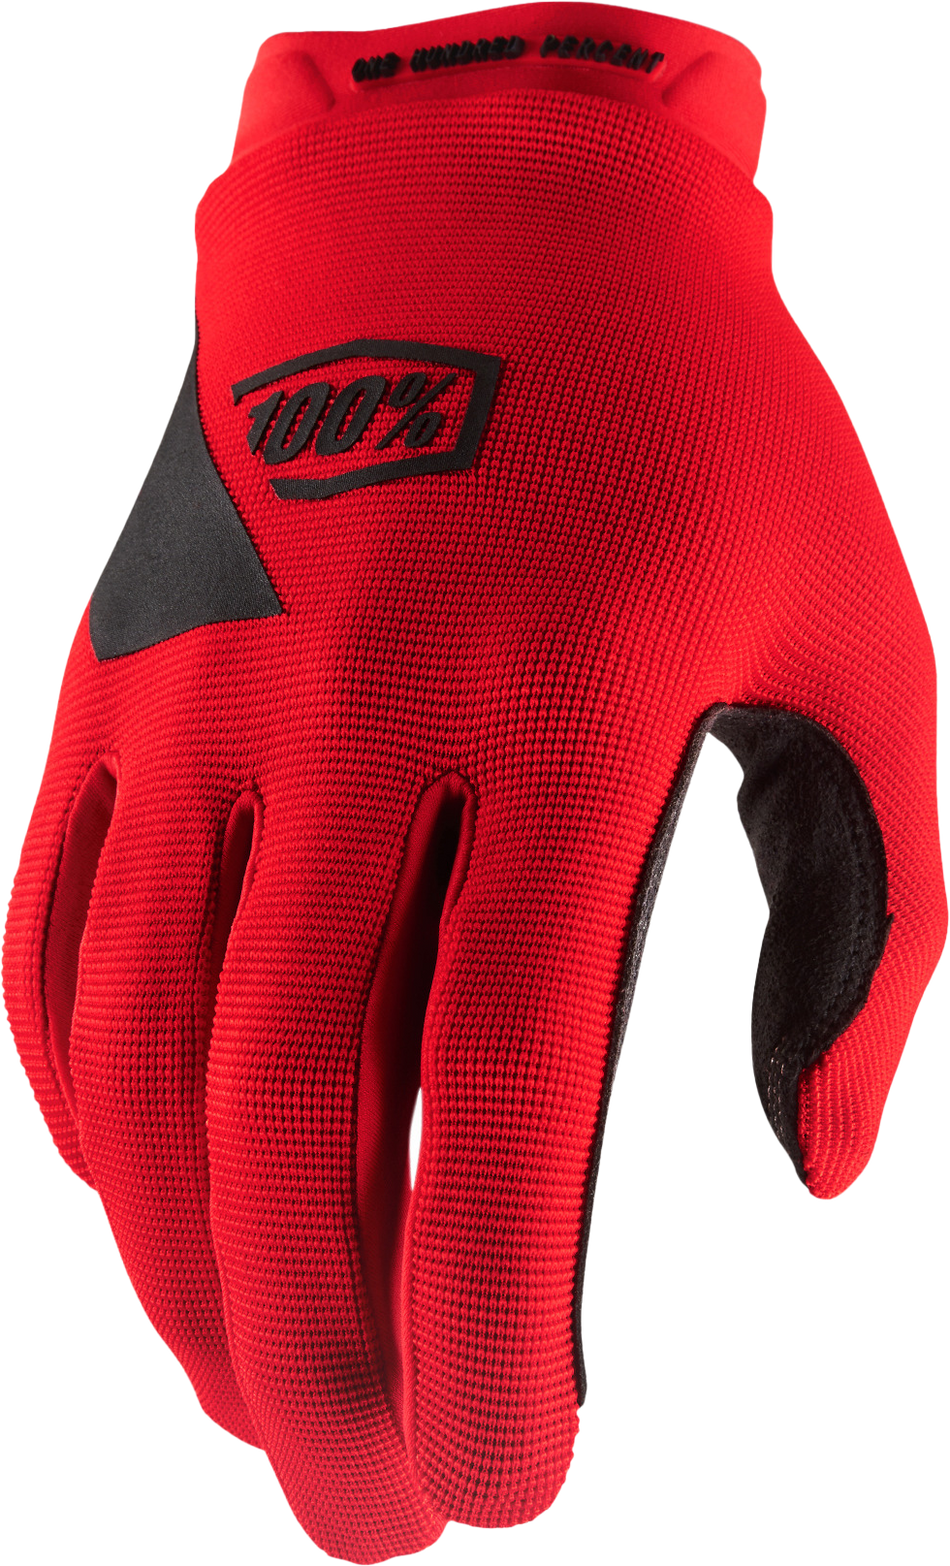 100% Ridecamp Youth Gloves Red Xl 10012-00007